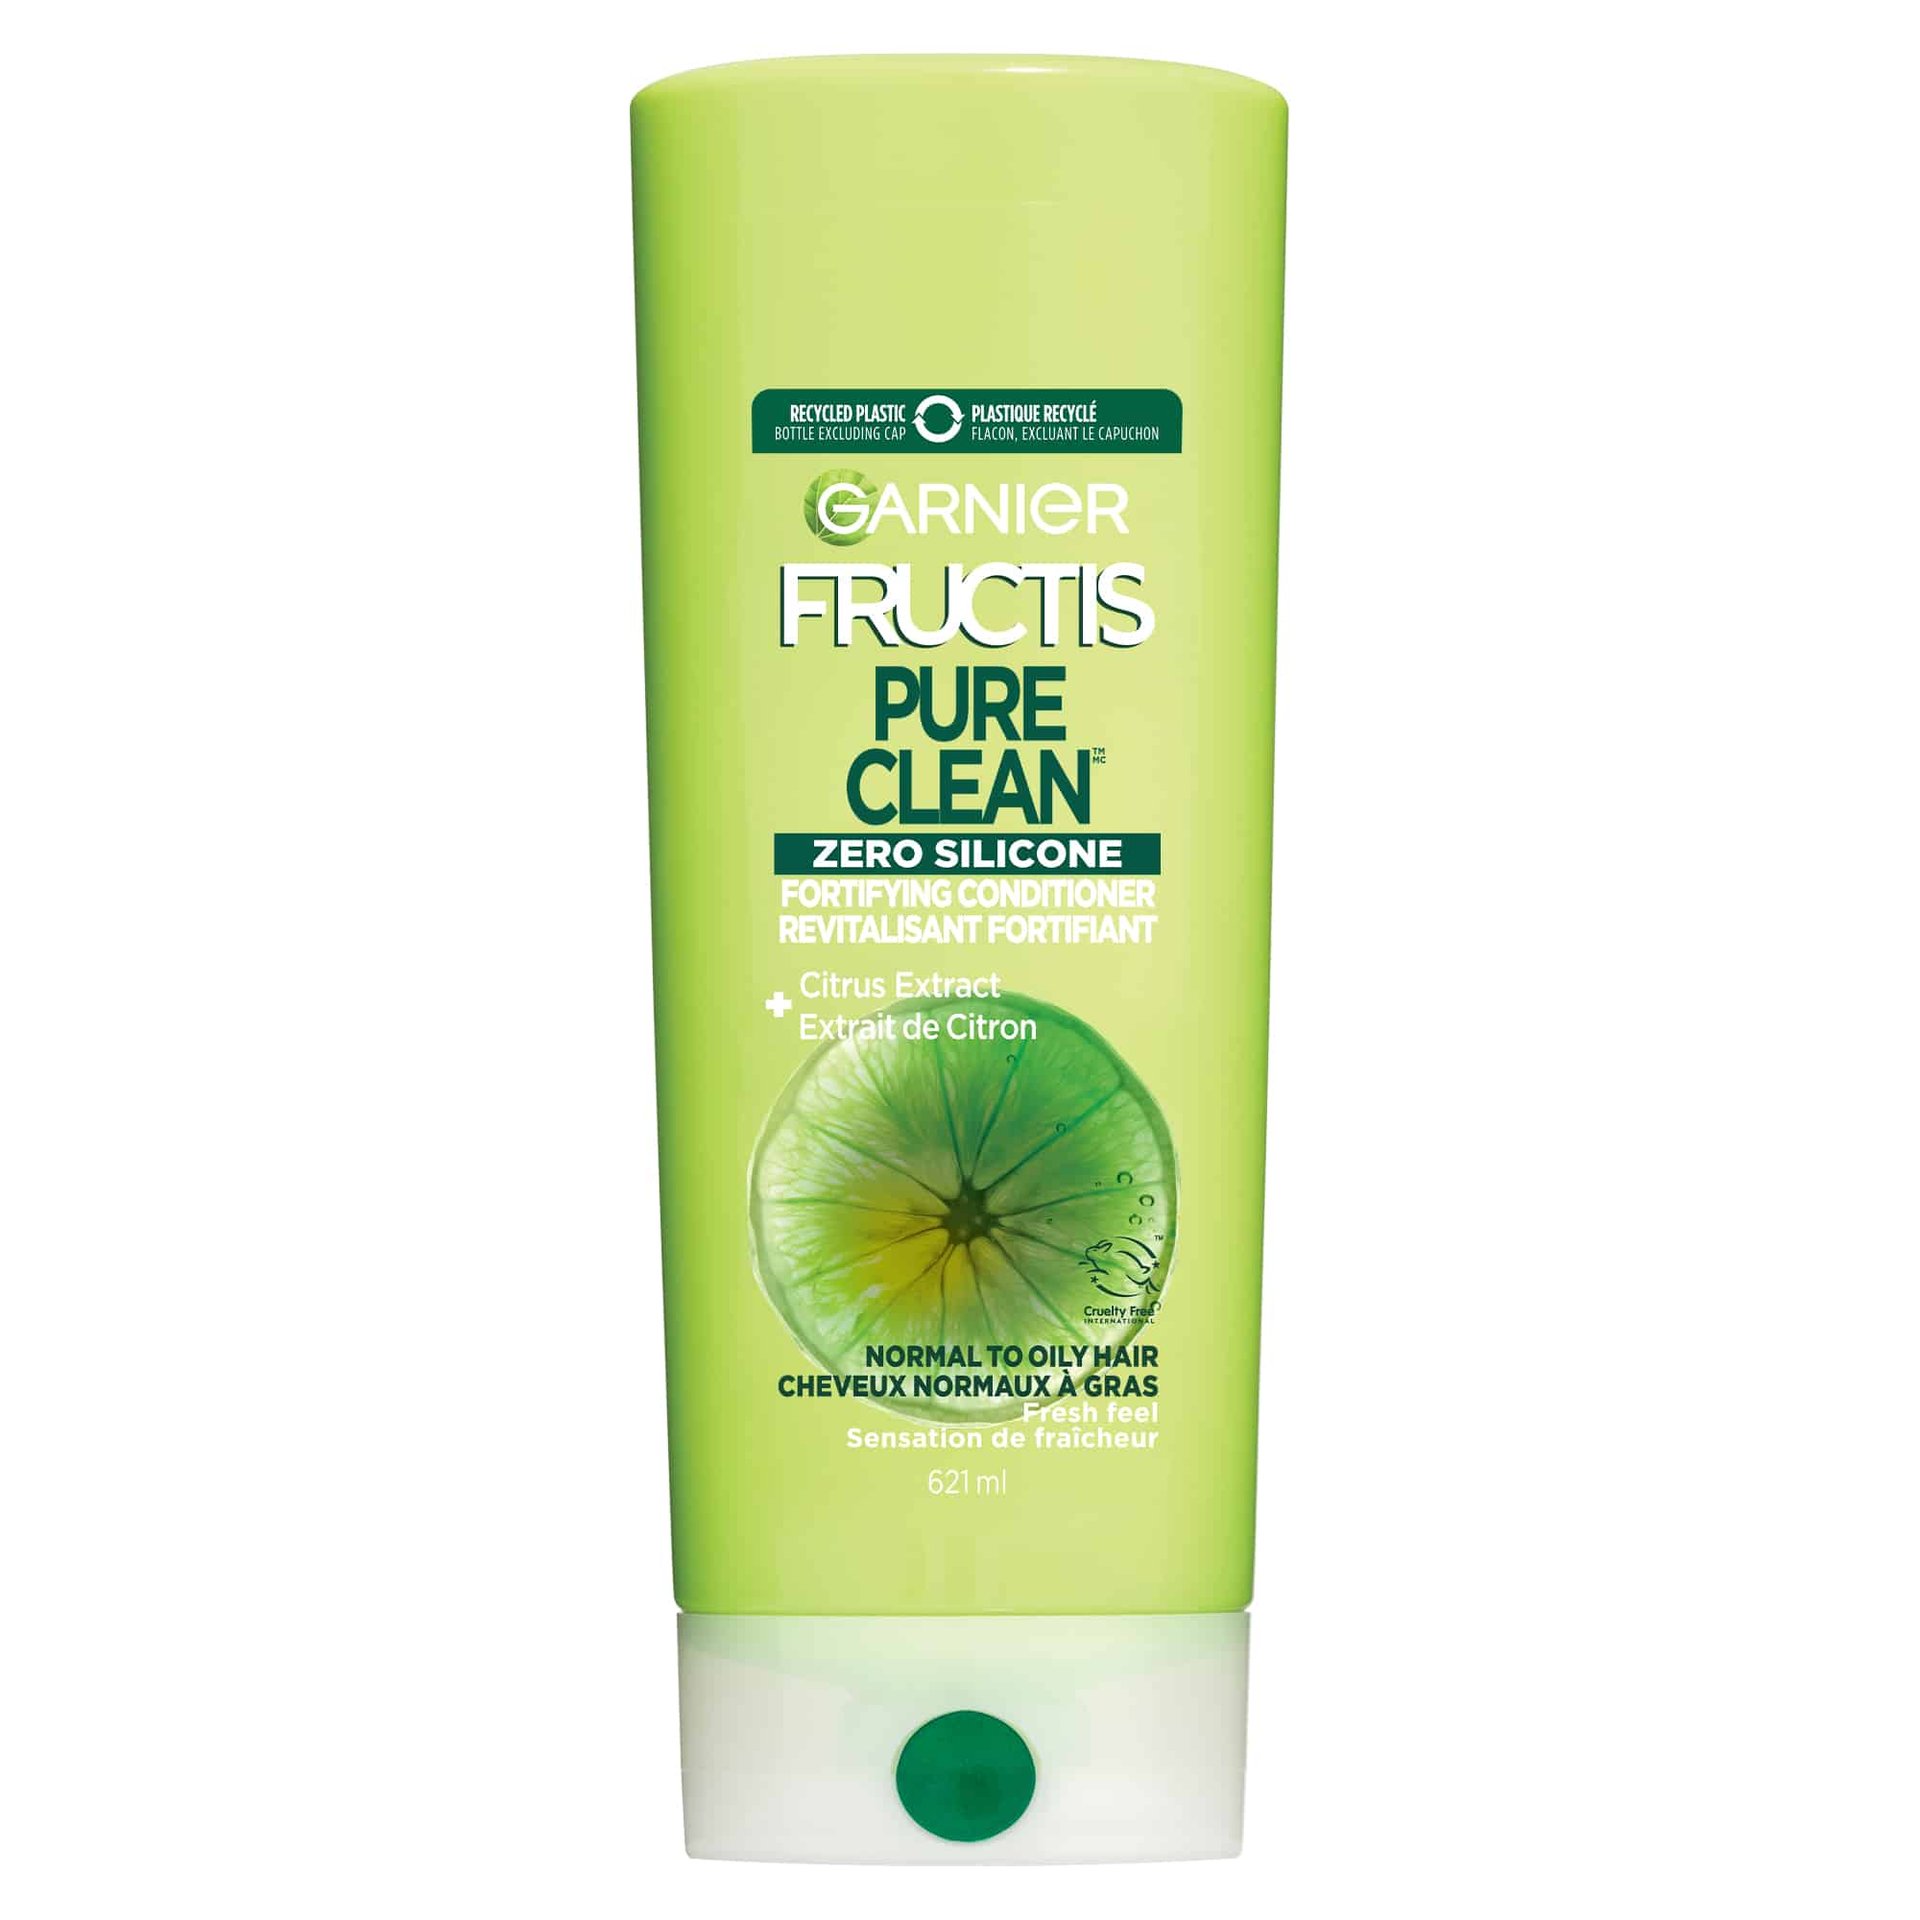 Conditionner_fructis pure clean 621ml Front 603084073191